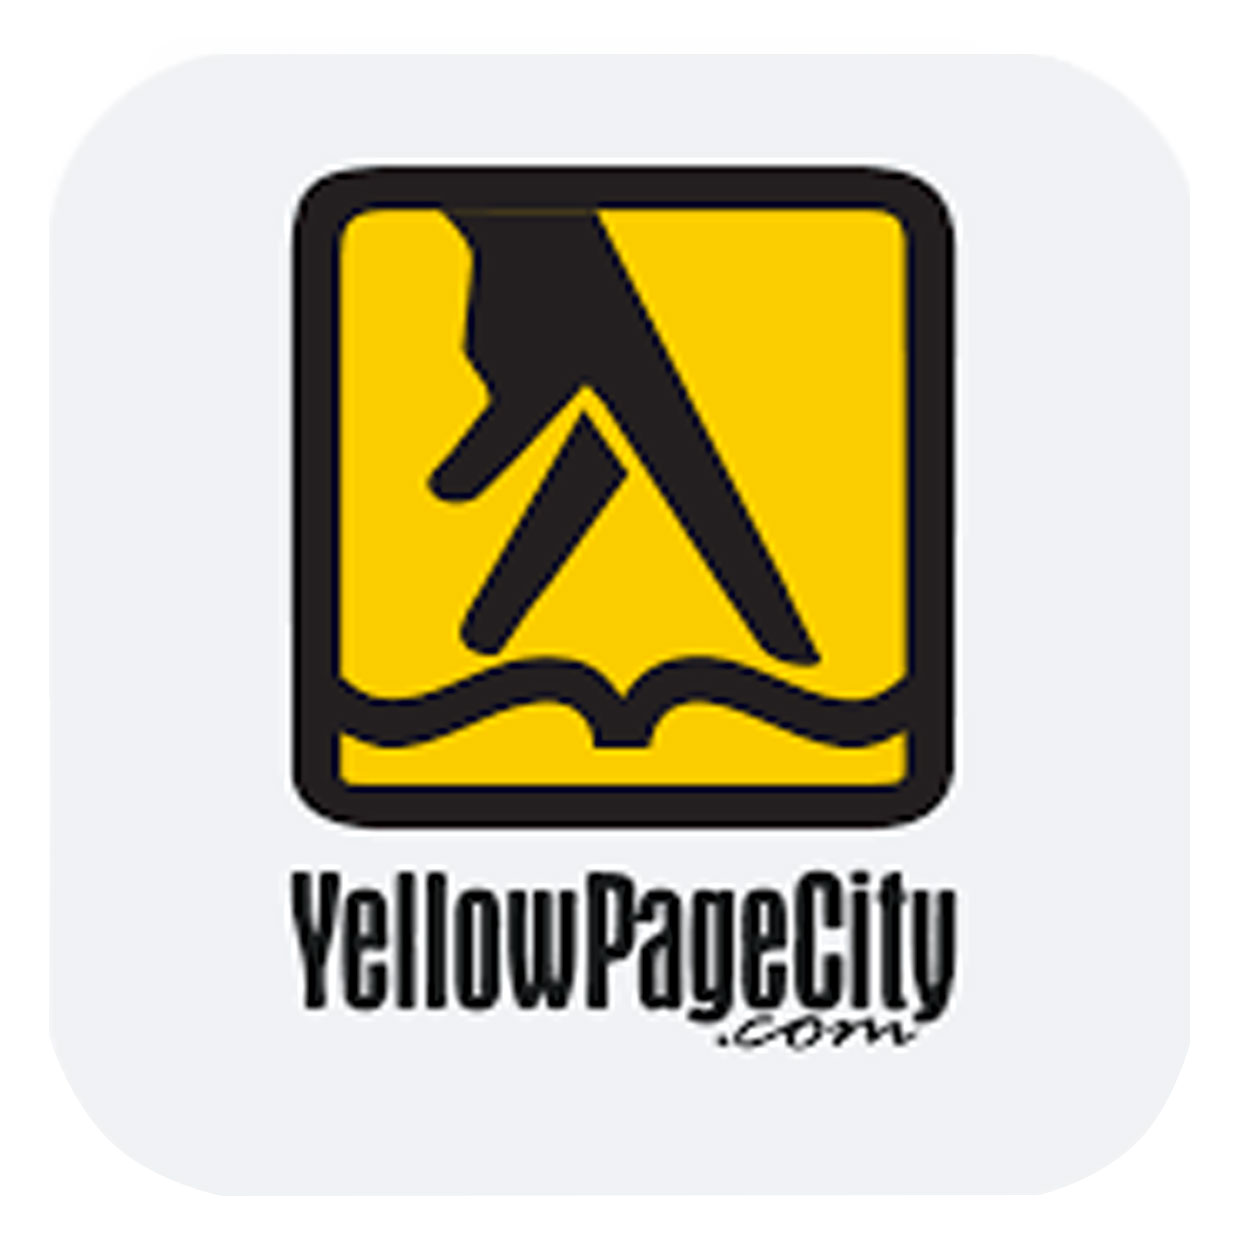 Yellow Page City - C&M Building Services